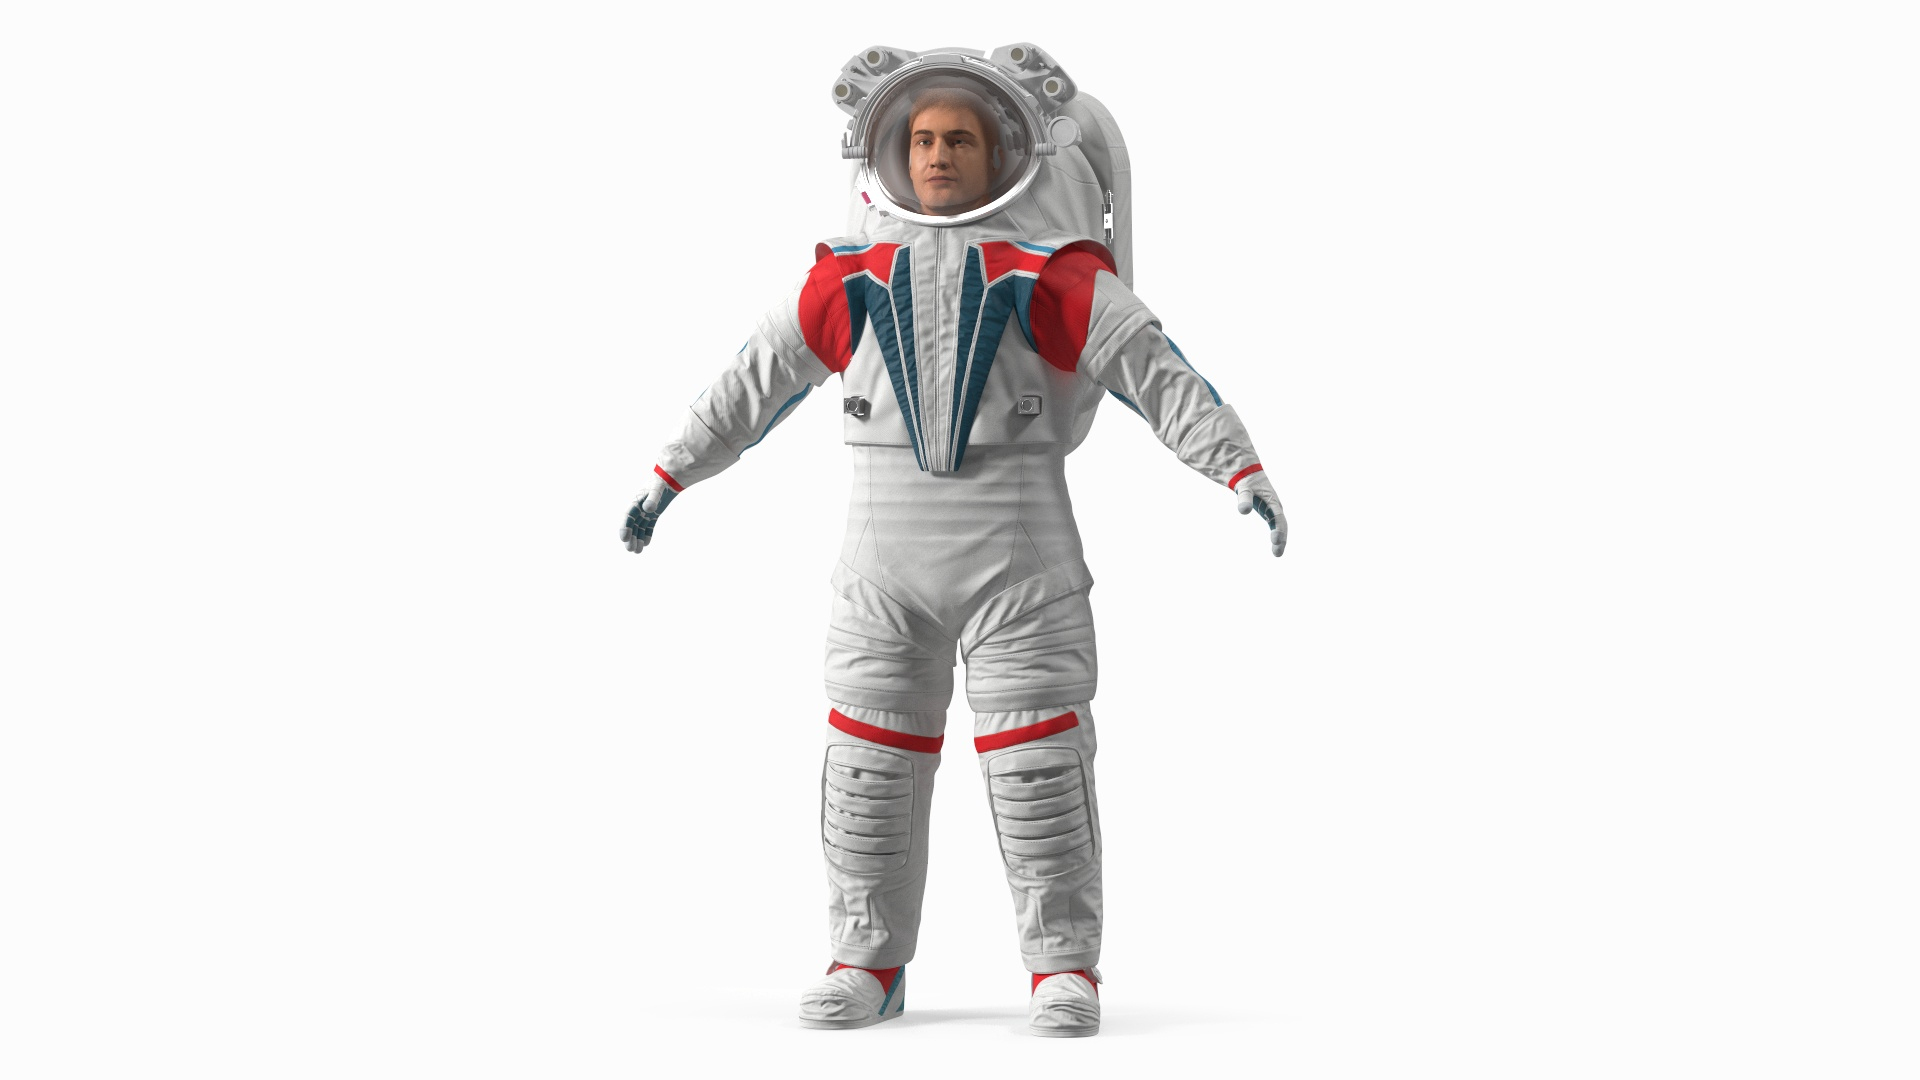 Space wear: Astronaut fashion through the years (pictures) - CNET